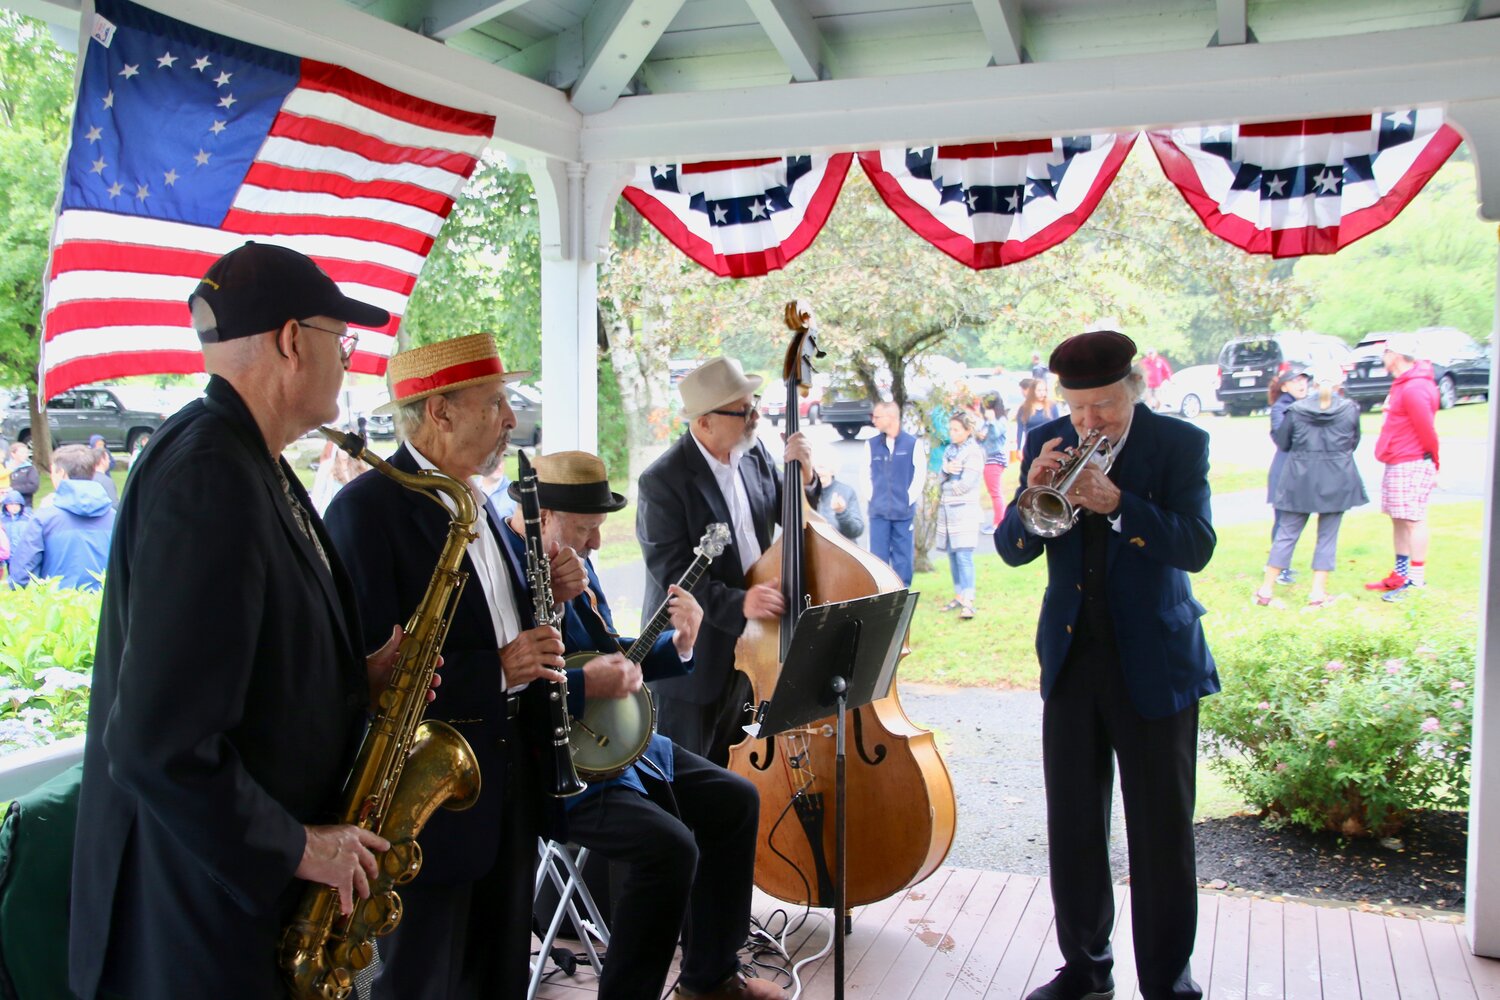 The Good Ole Salts Jazz Band entertained the crowd at the 2022 Manchester Essex Rotary Club's Annual Red White &amp; Blue breakfast at Tuck's Point.  This year's fest is scheduled for Saturday, July 1.